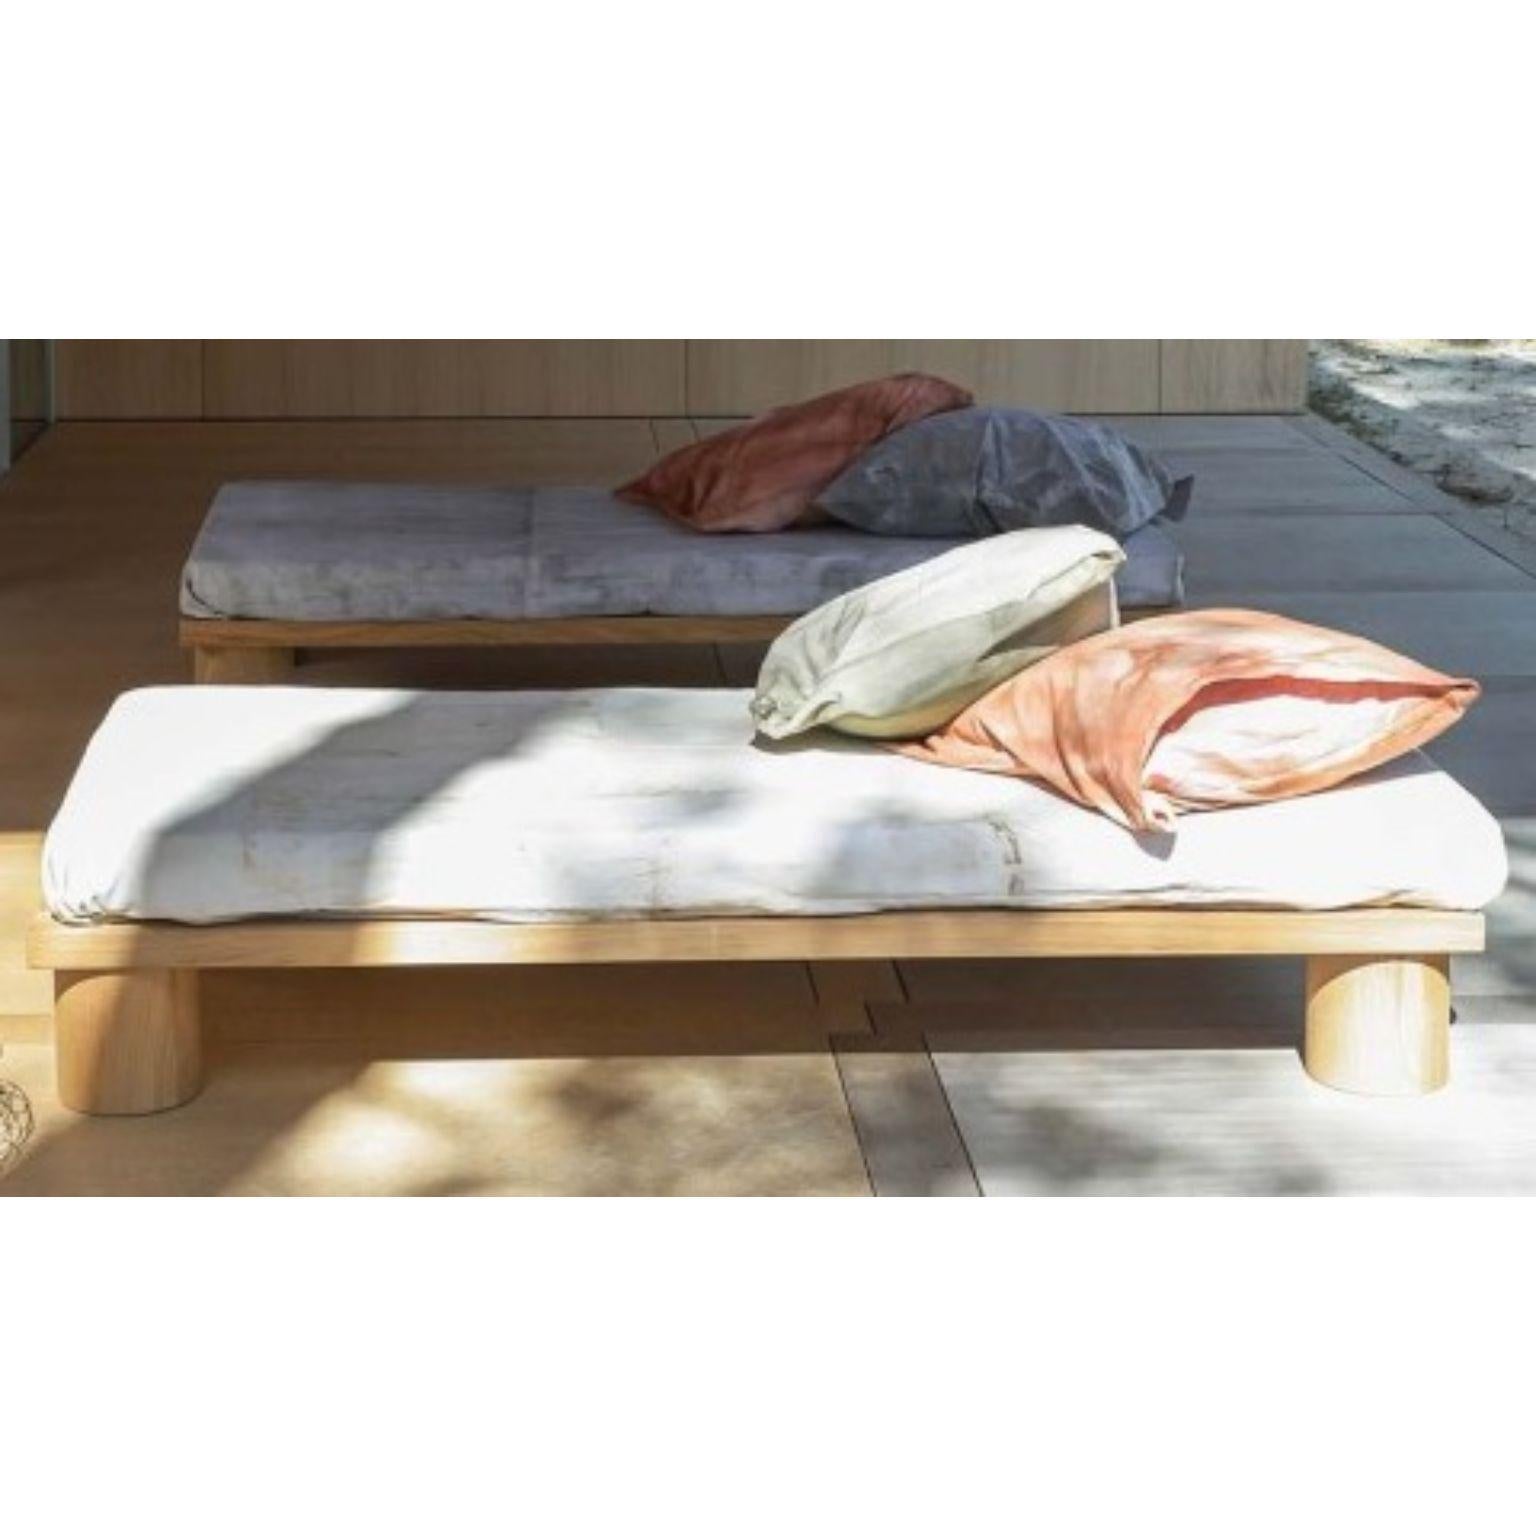 Set Of 2 Solid Oak Small Beds by Mylene Niedzialkowski
Dimensions: L 90 x W 200.
Materials: Solid oak wood.

A solid oak bed with turned legs, available in several sizes and made entirely handmade in the South West. Made from solid oak from French